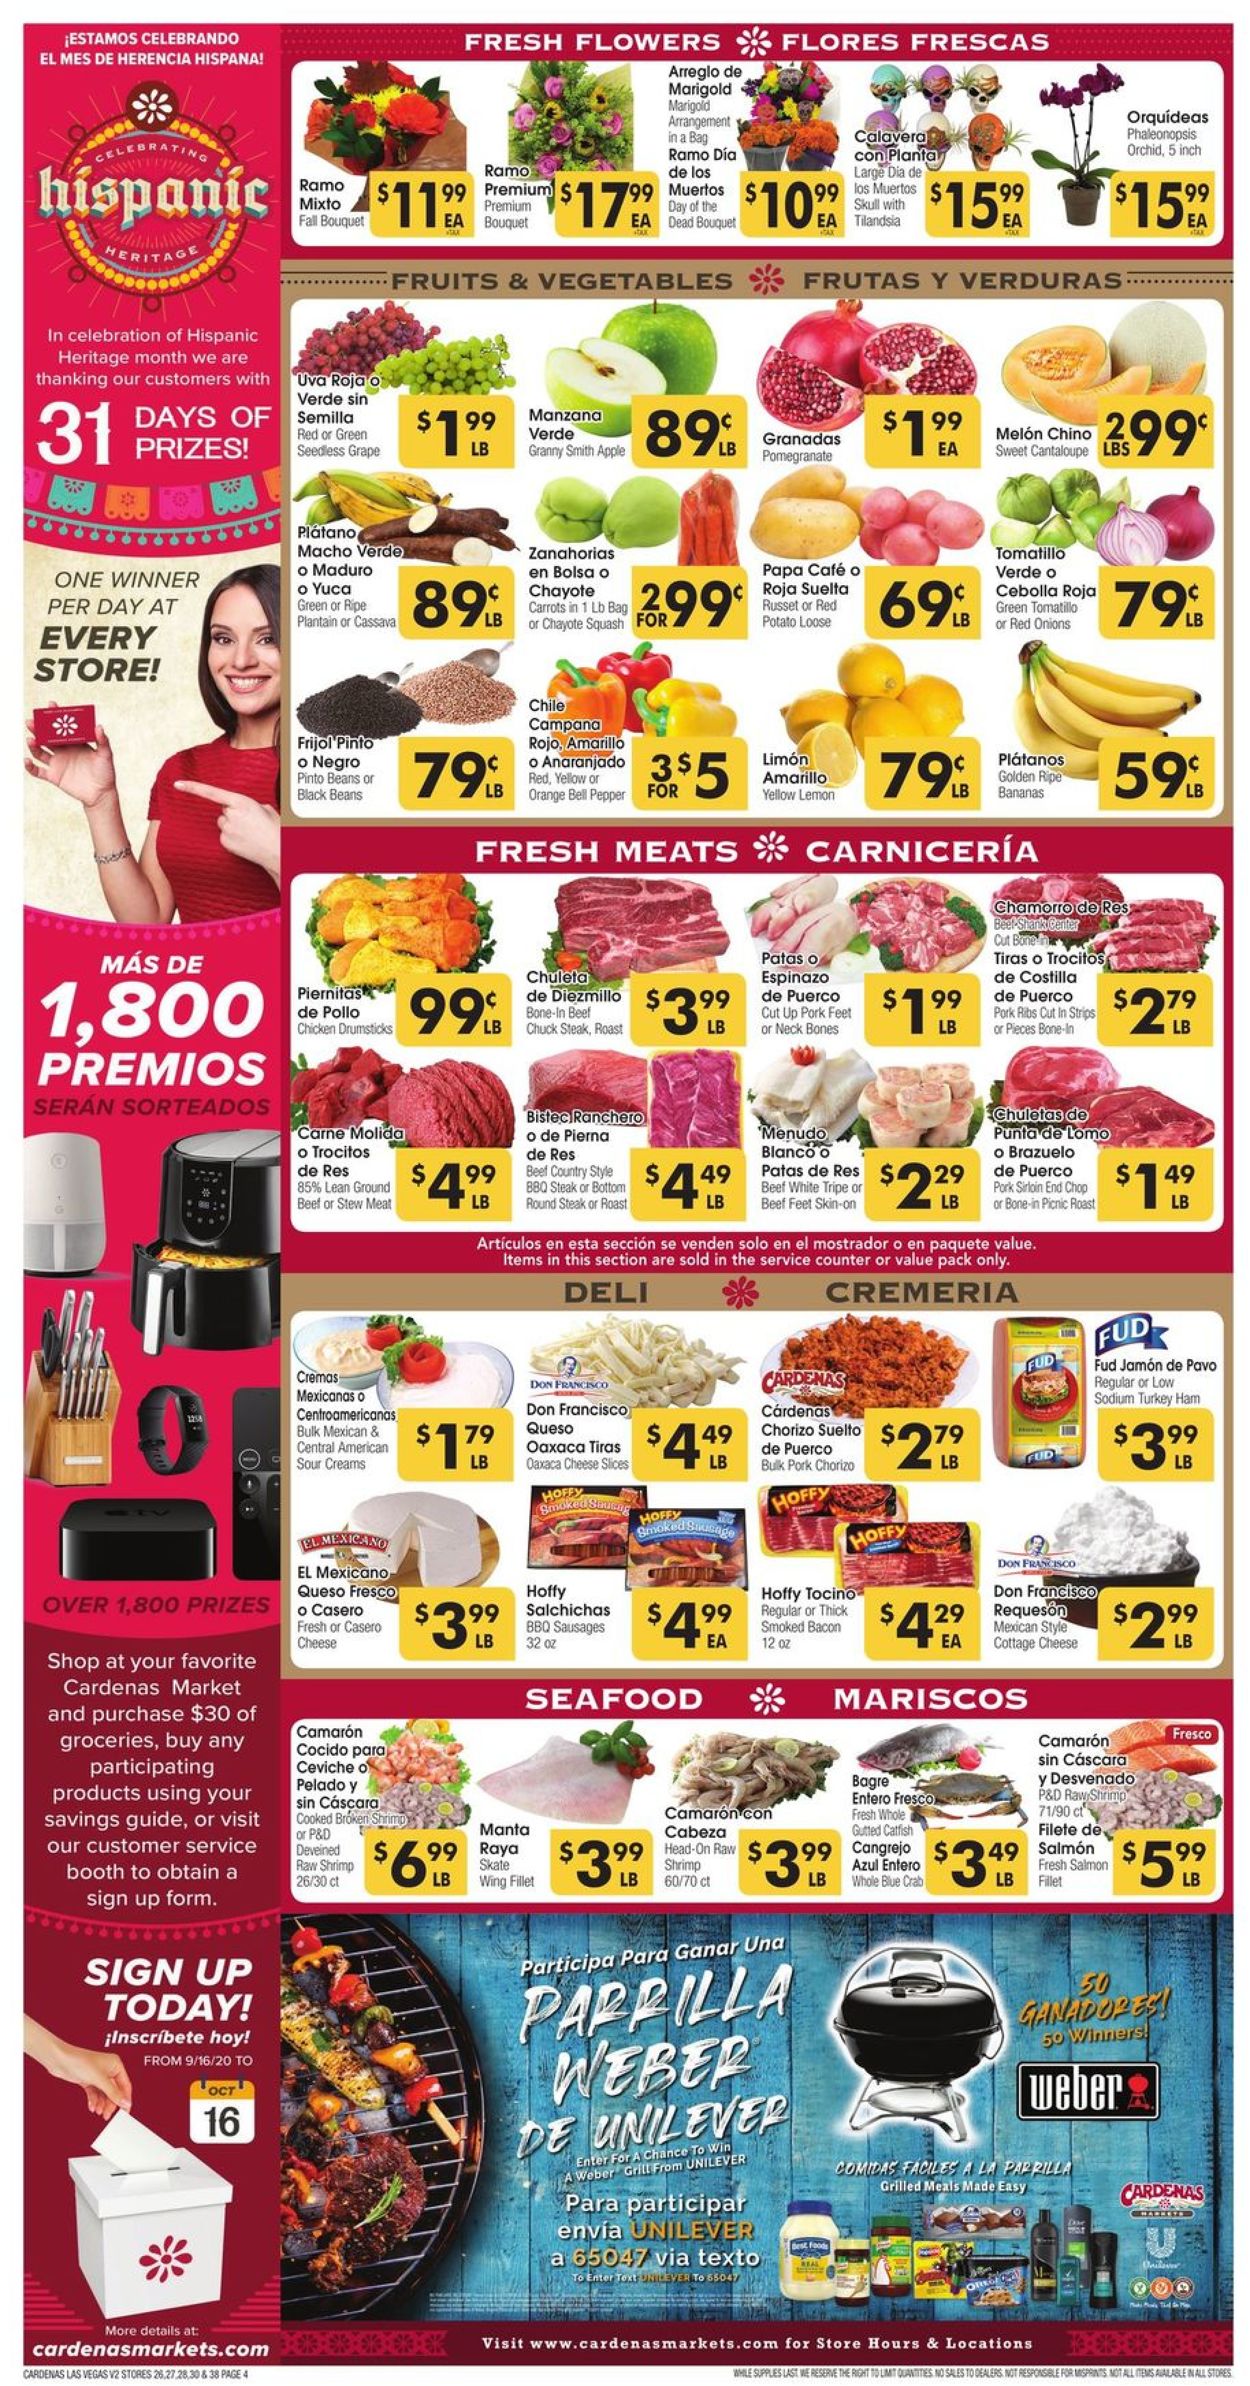 Cardenas Ad from 10/07/2020